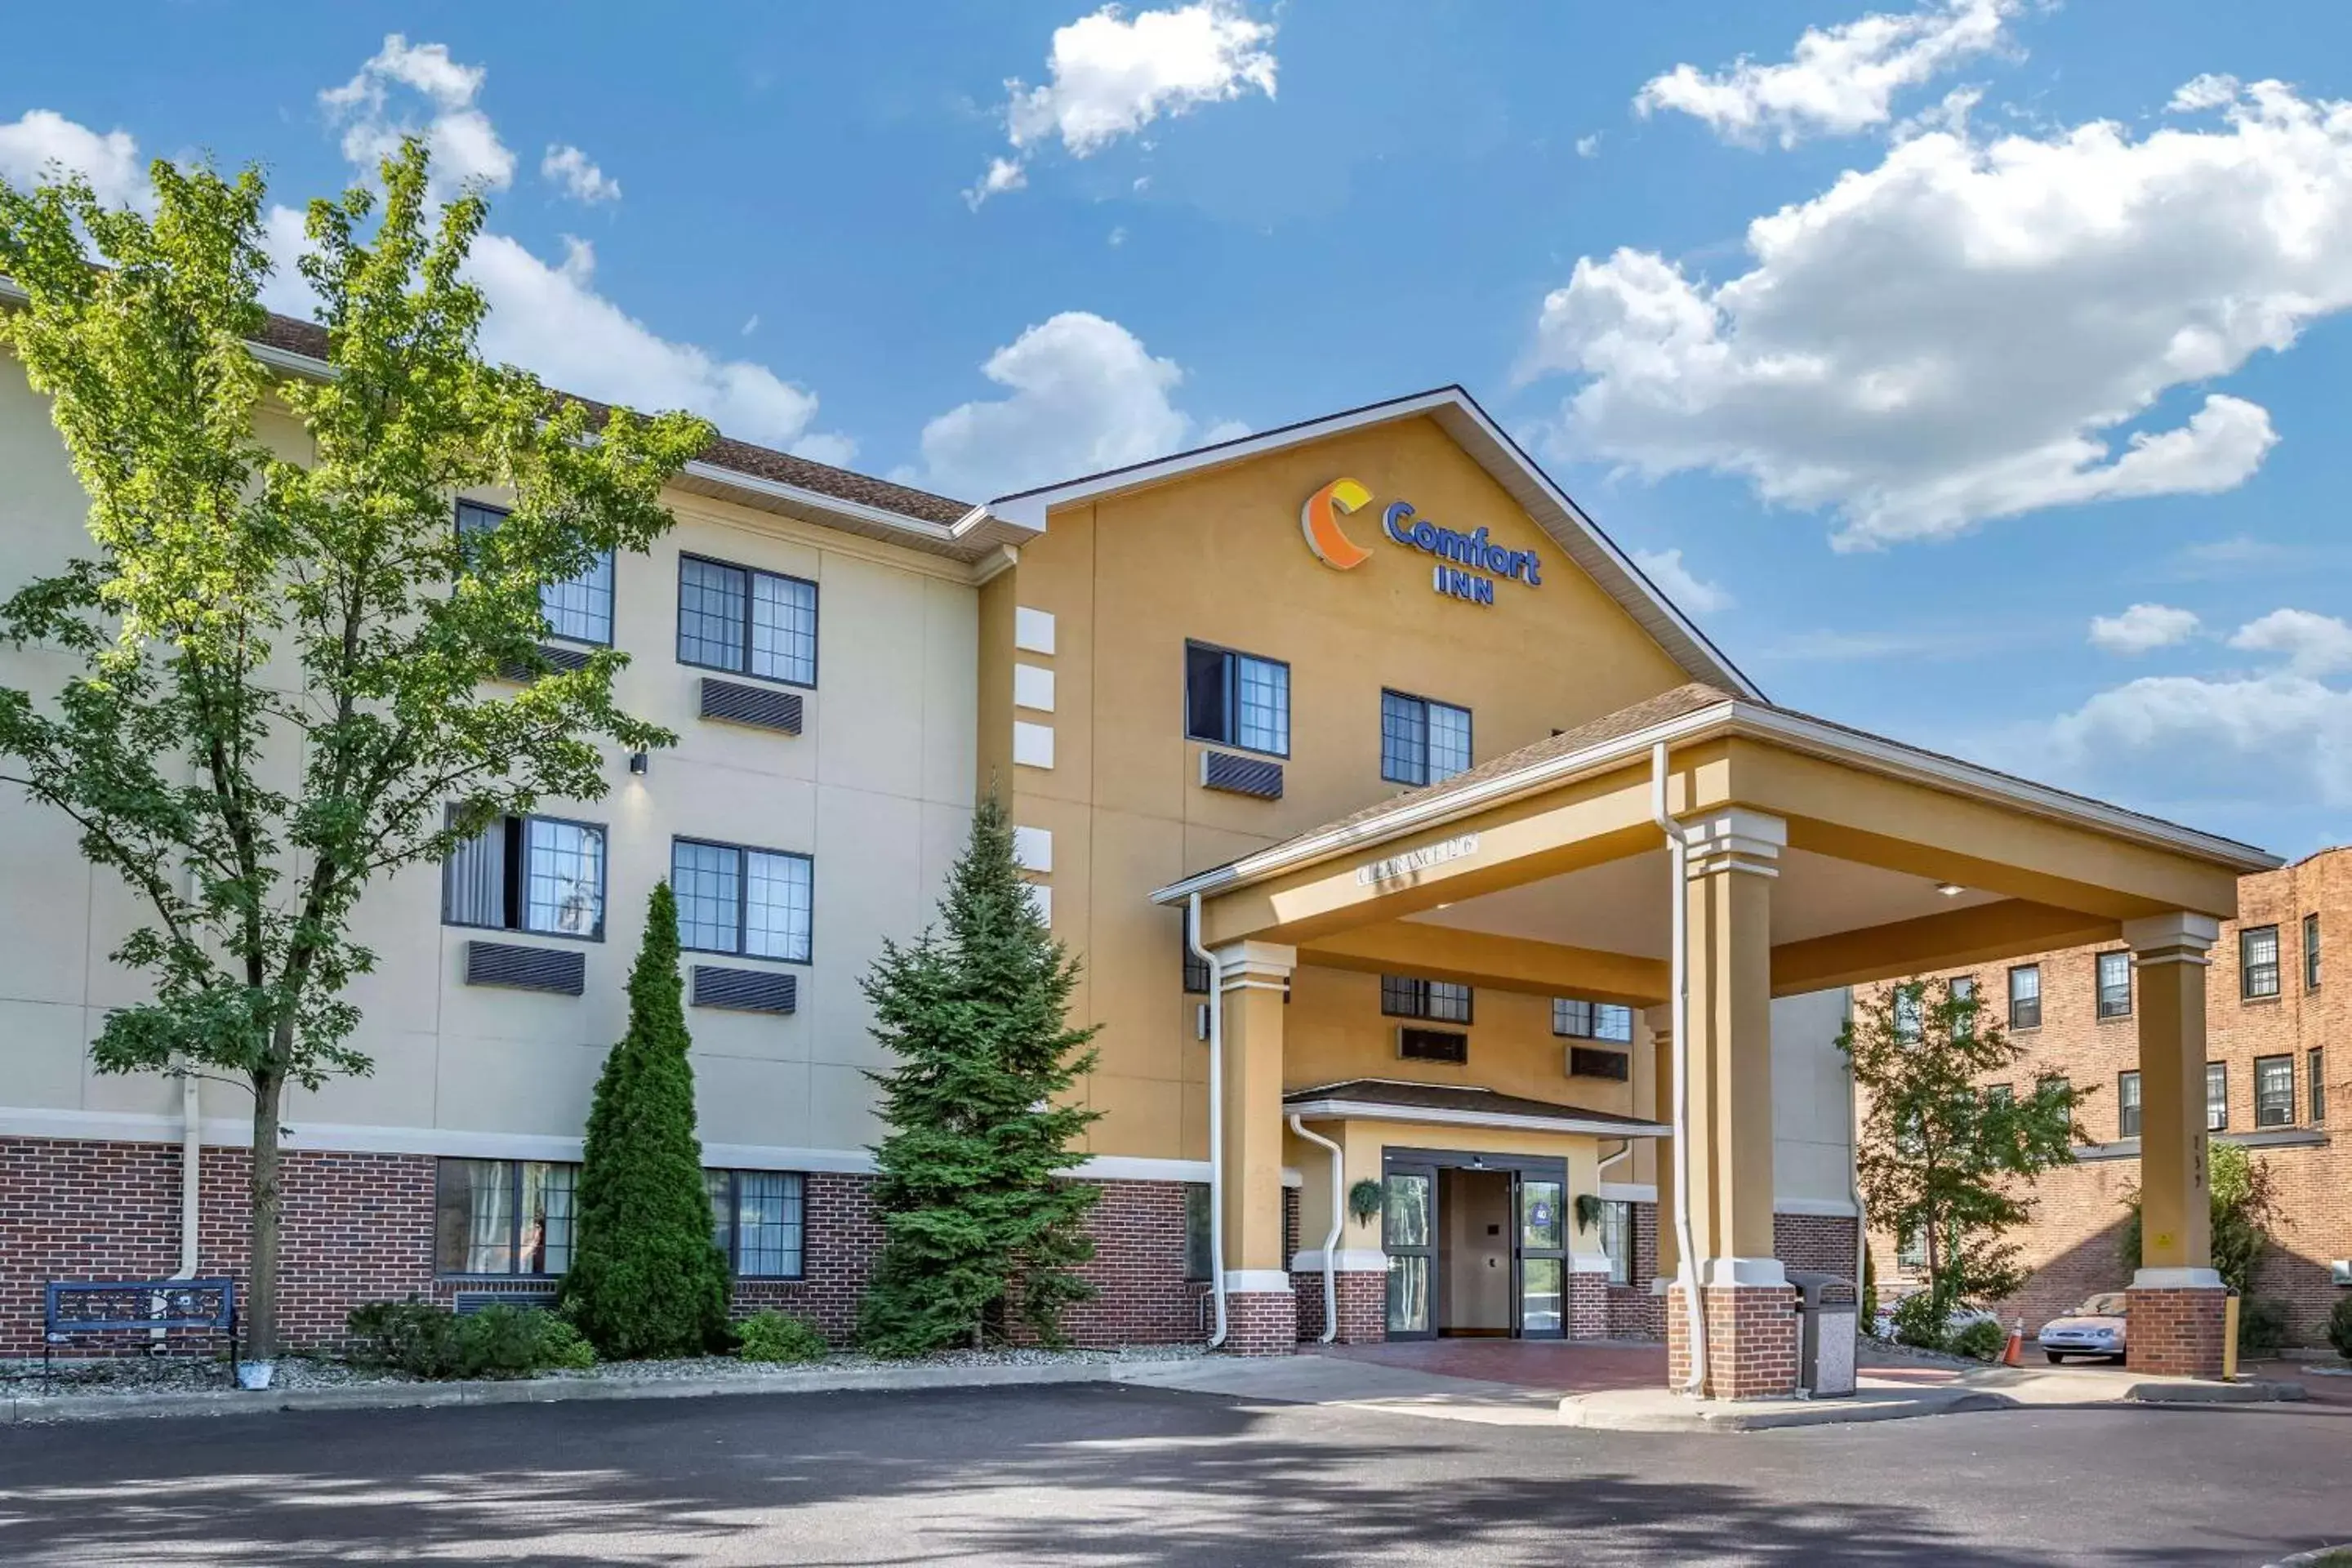 Property Building in Comfort Inn Downtown - University Area